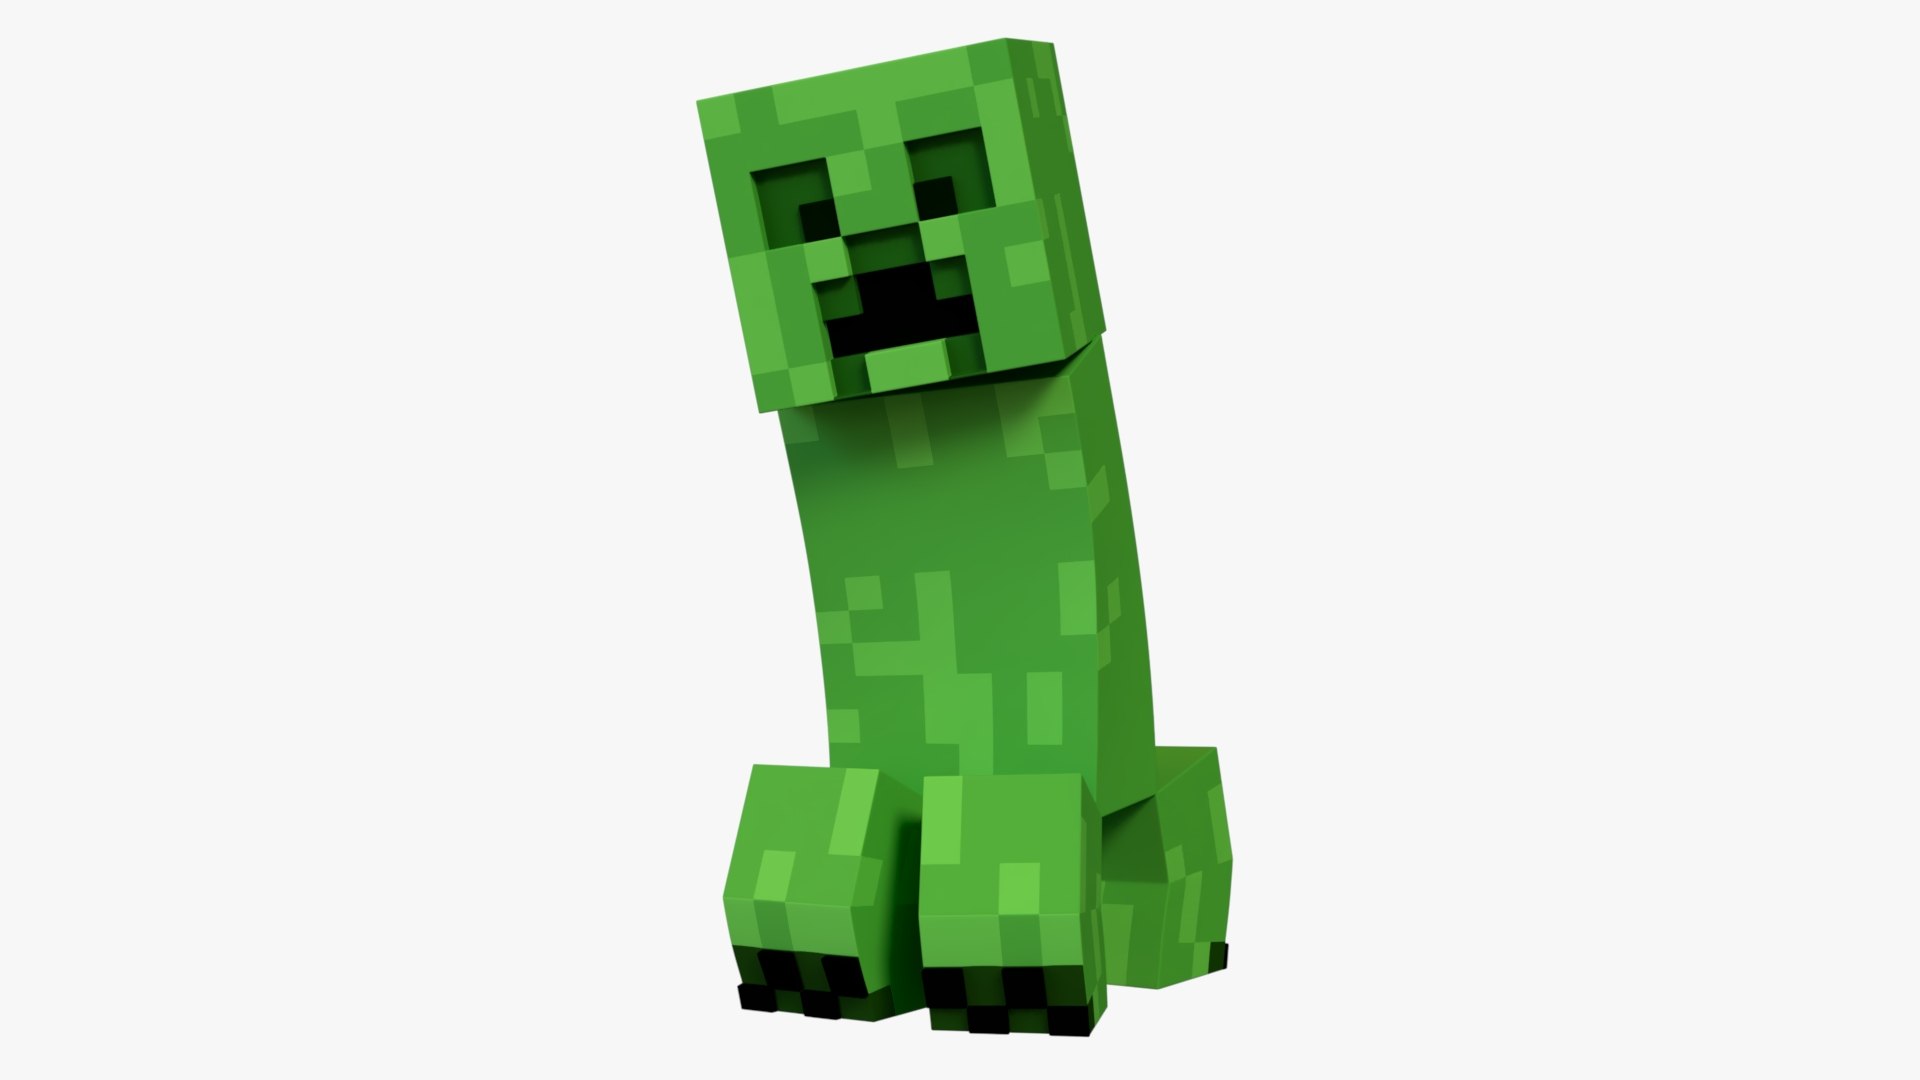 Creeper 3D Models for Free - Download Free 3D ·